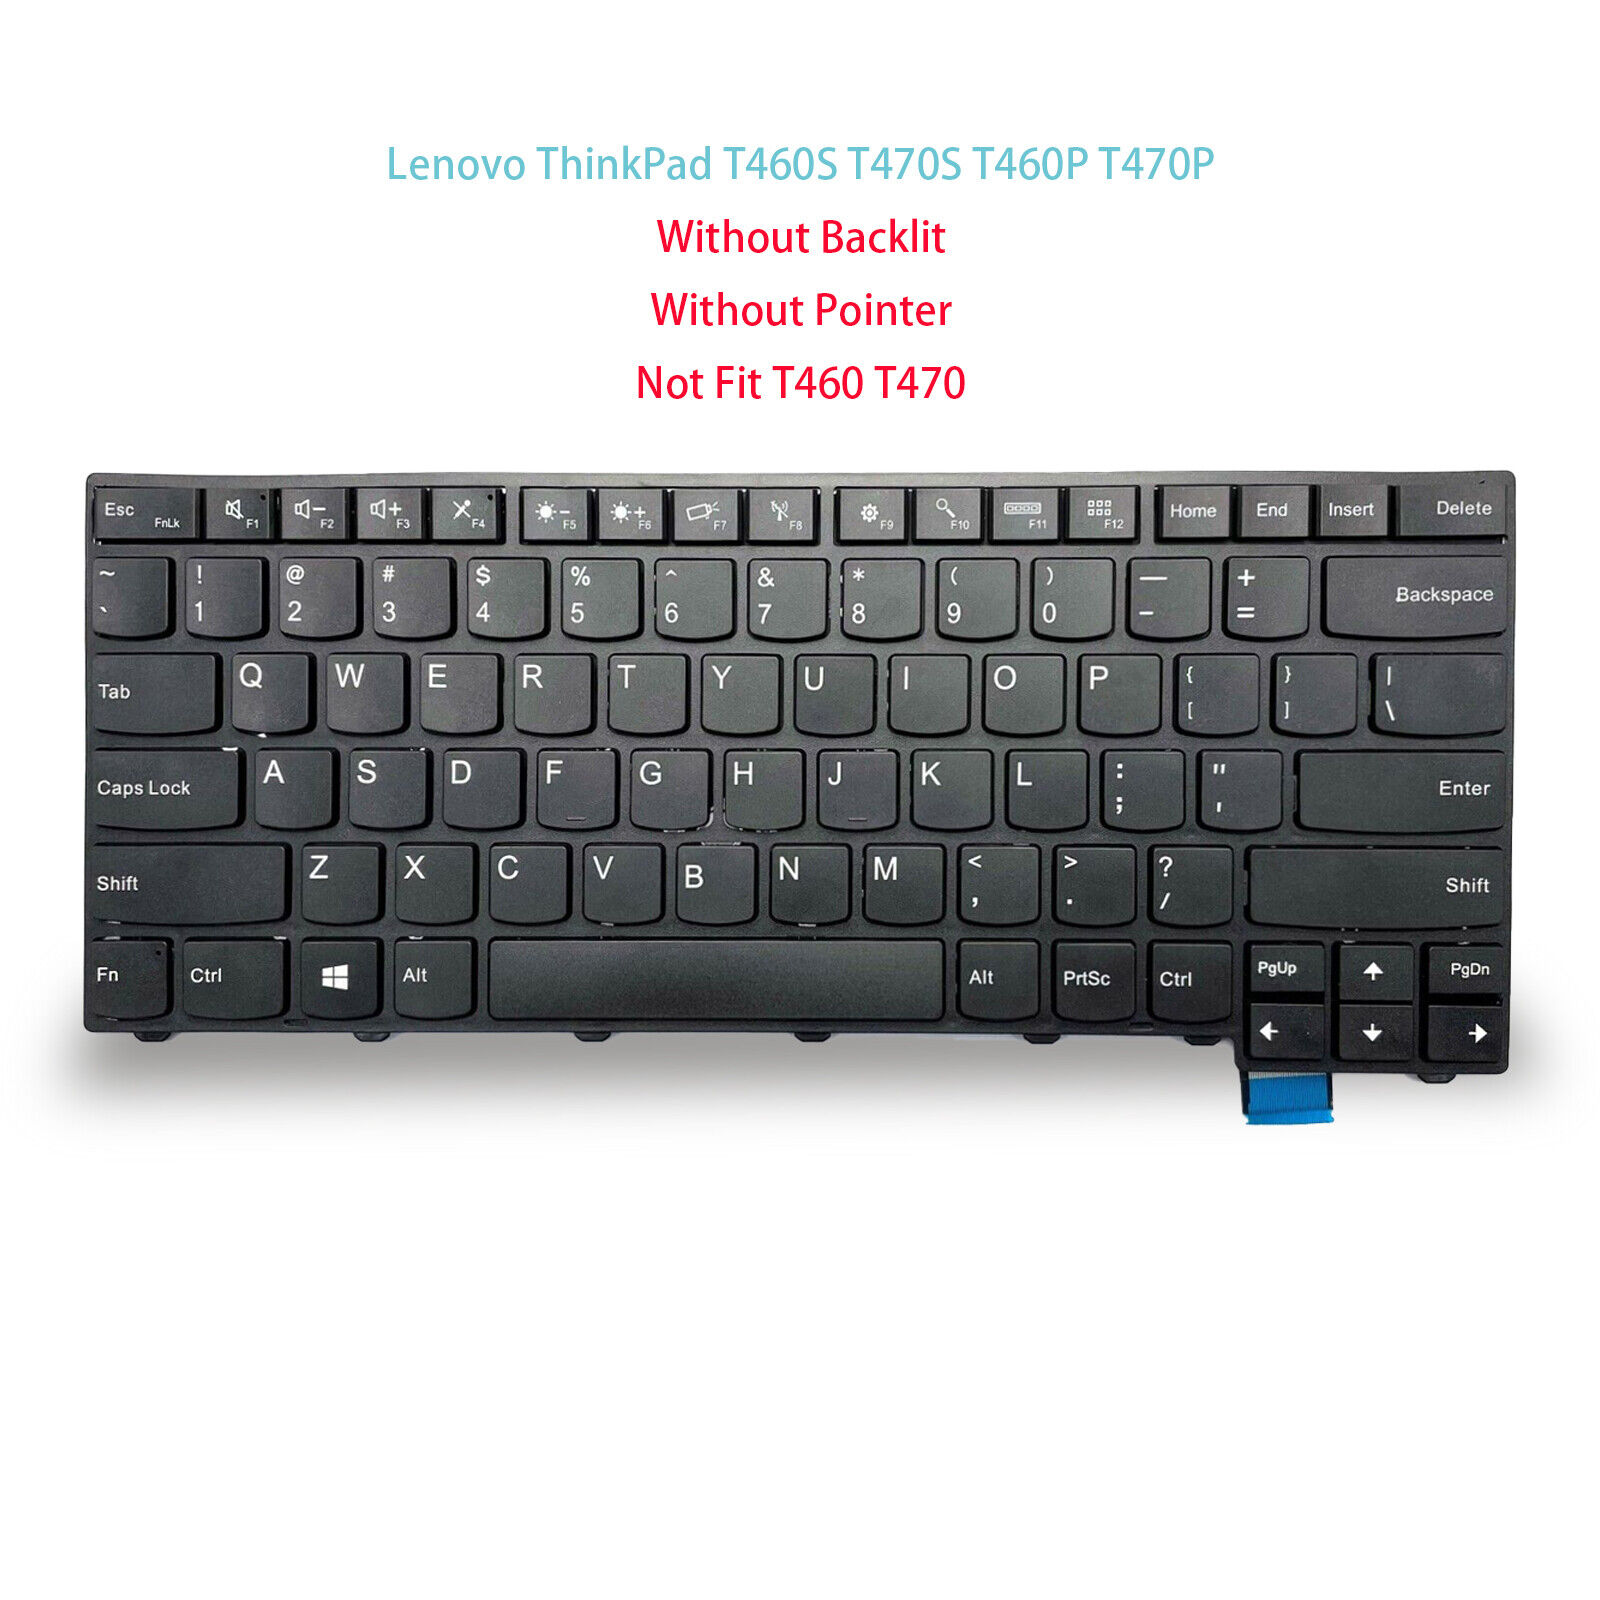 US Keyboard No Pointer for Lenovo ThinkPad T460S T470S T460P T470P Non-Backlit